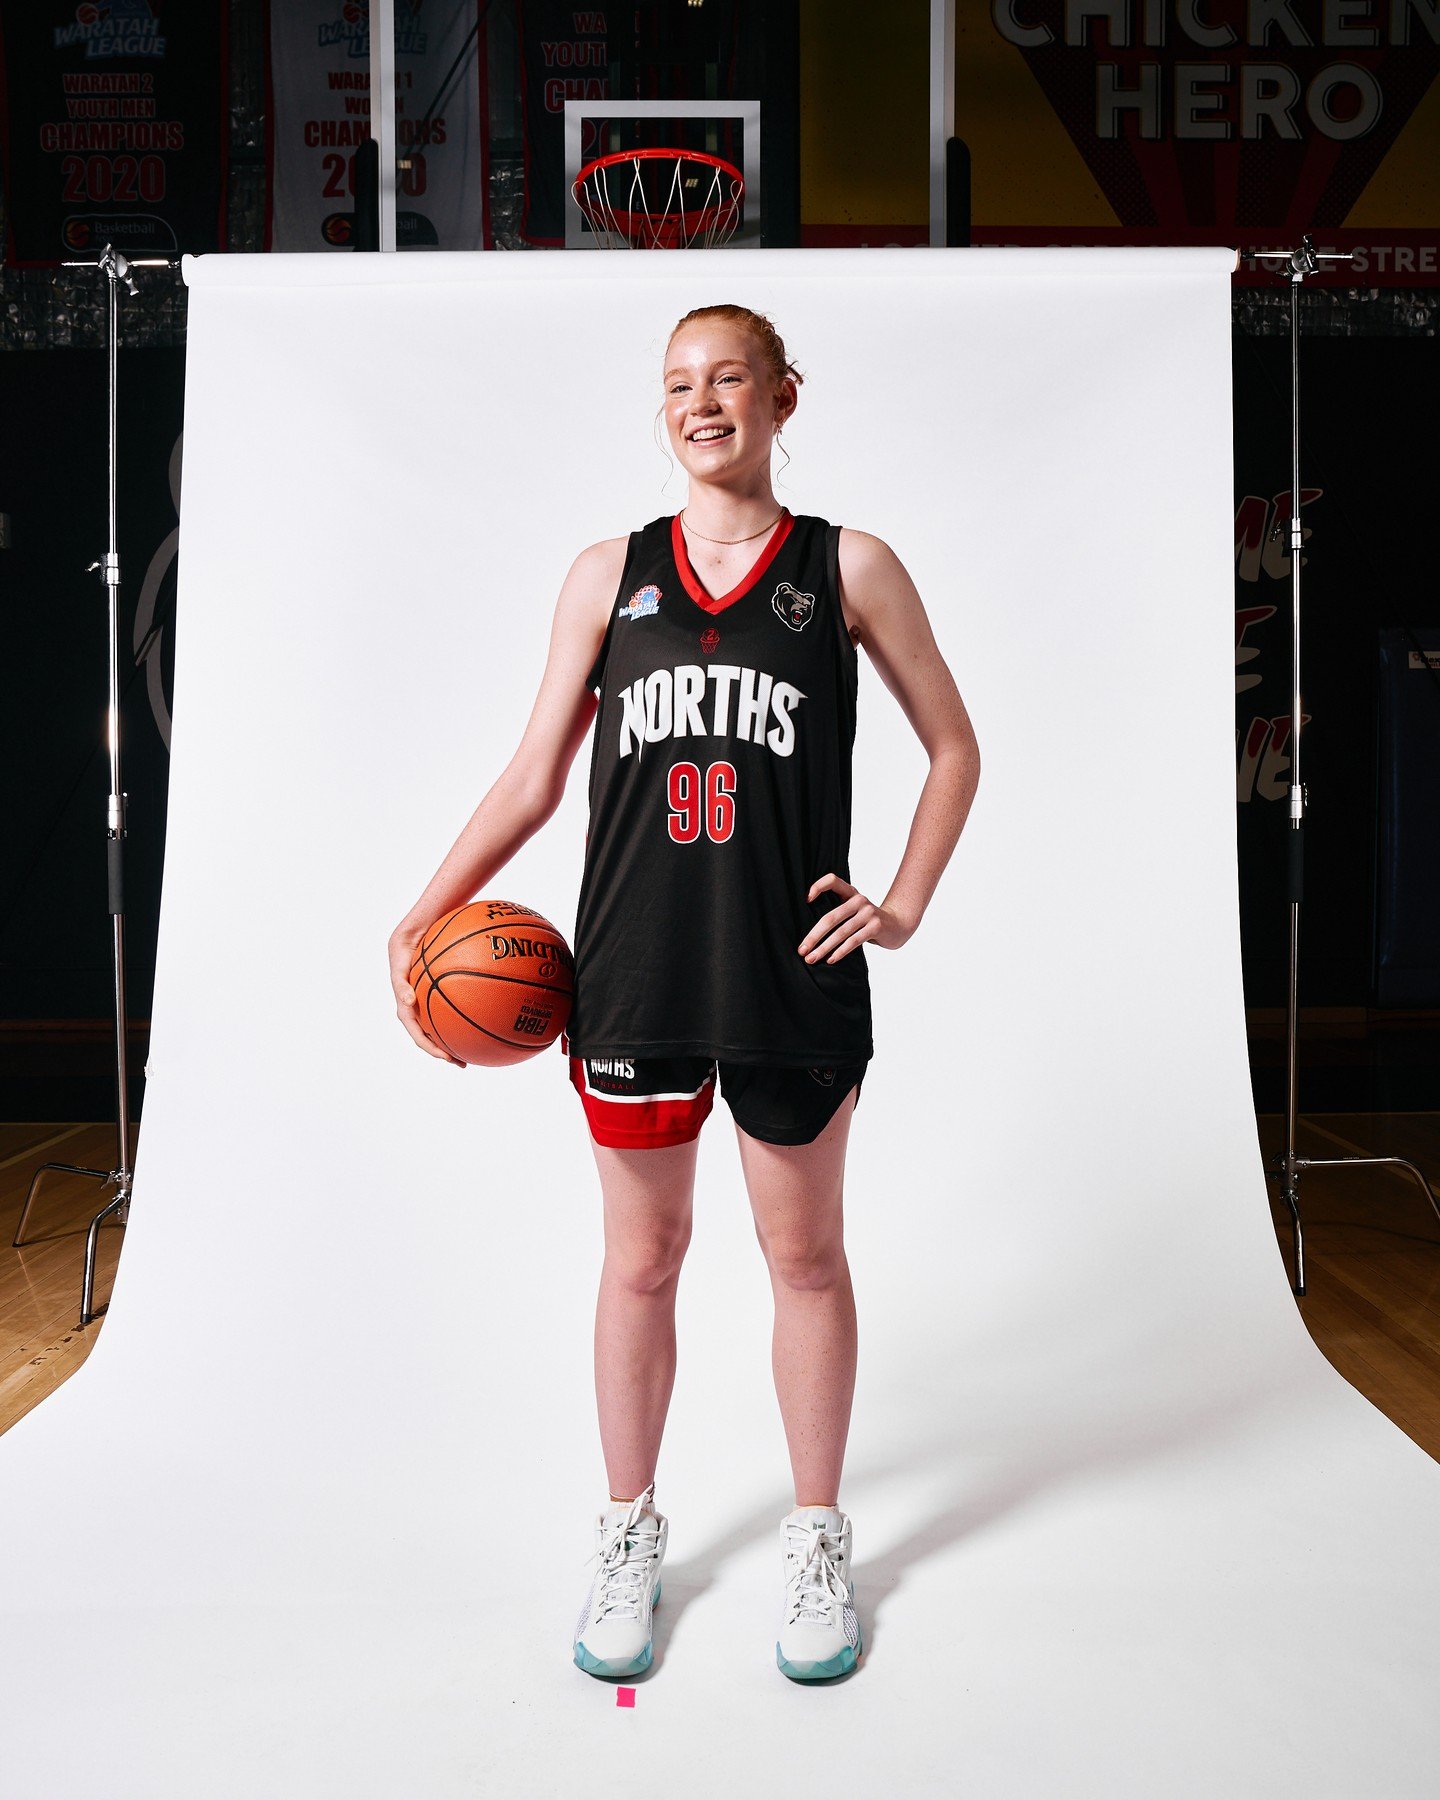 NEW ZEALAND U17 WOMEN&rsquo;S WORLD CUP TEAM SELECTION 🇳🇿

We're excited to announce the selection of Olivia Hastings (Norths U18G Black/NBL1 Women) to the @basketballnz U17 Women&rsquo;s National Team that will compete at the 2024 FIBA U17 Women&r